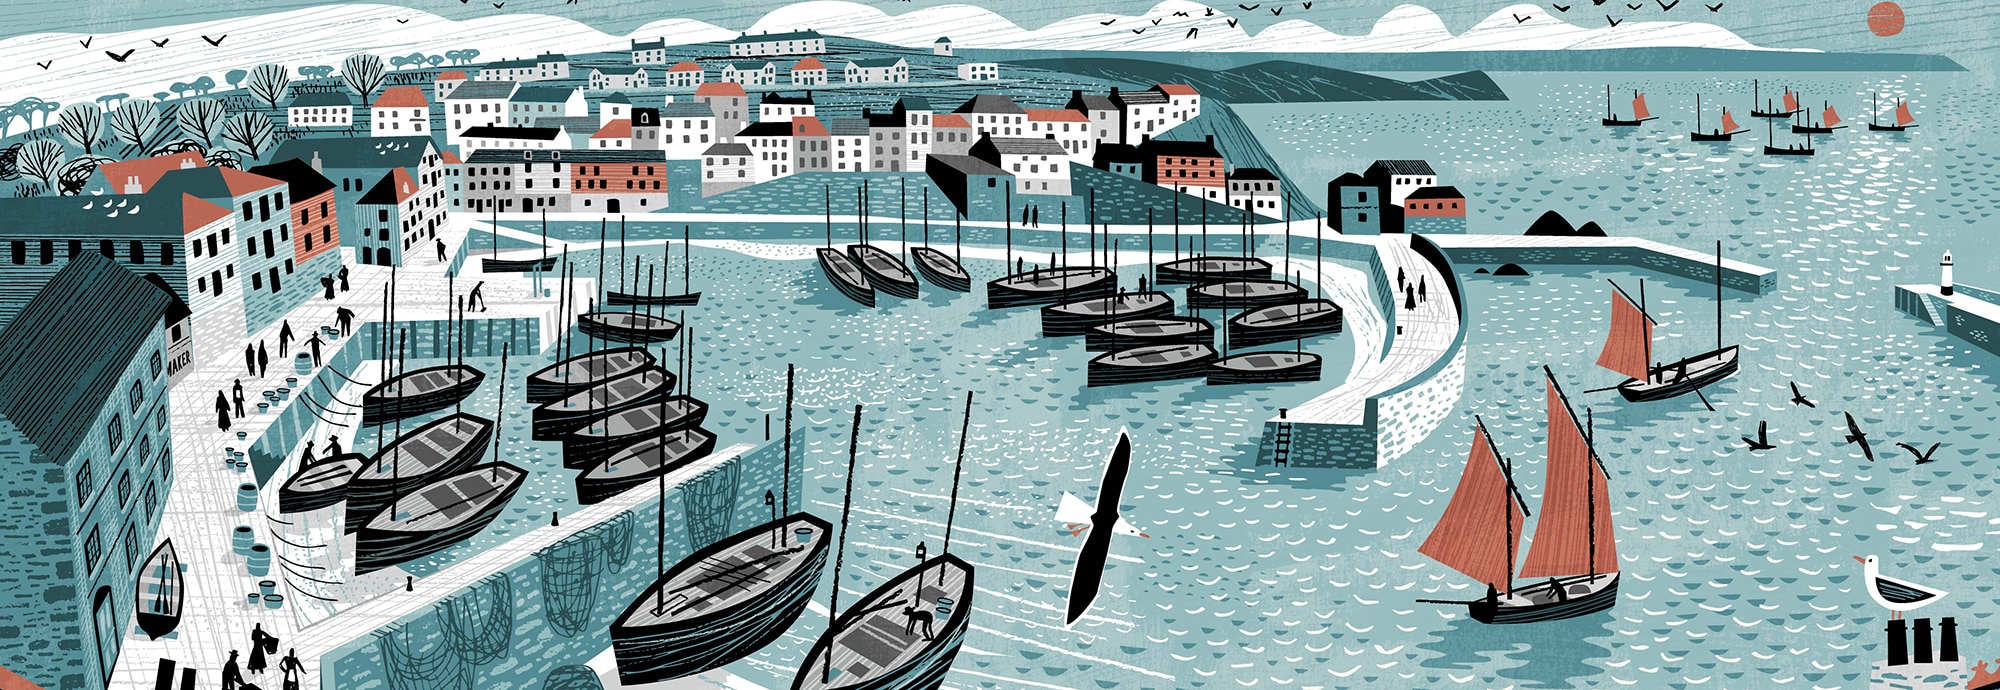 Illustration of Mevagissey harbour. There are houses dotted on the hillside, people walking along the harbour front, some ships moored in the harbour, and some out at sea.